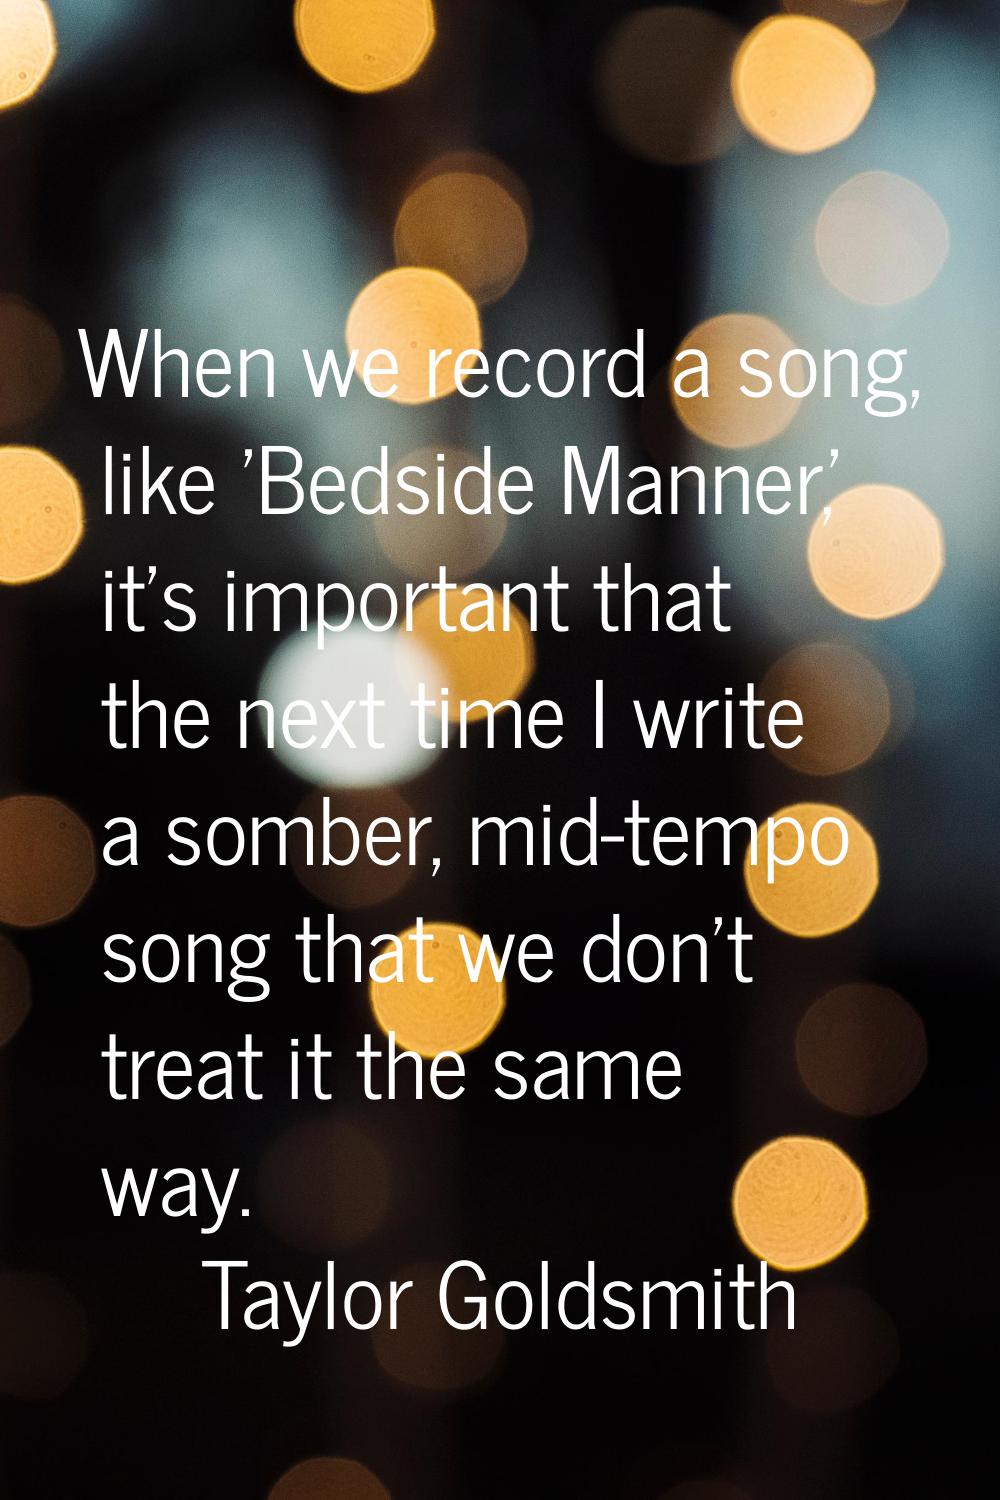 When we record a song, like 'Bedside Manner,' it's important that the next time I write a somber, m